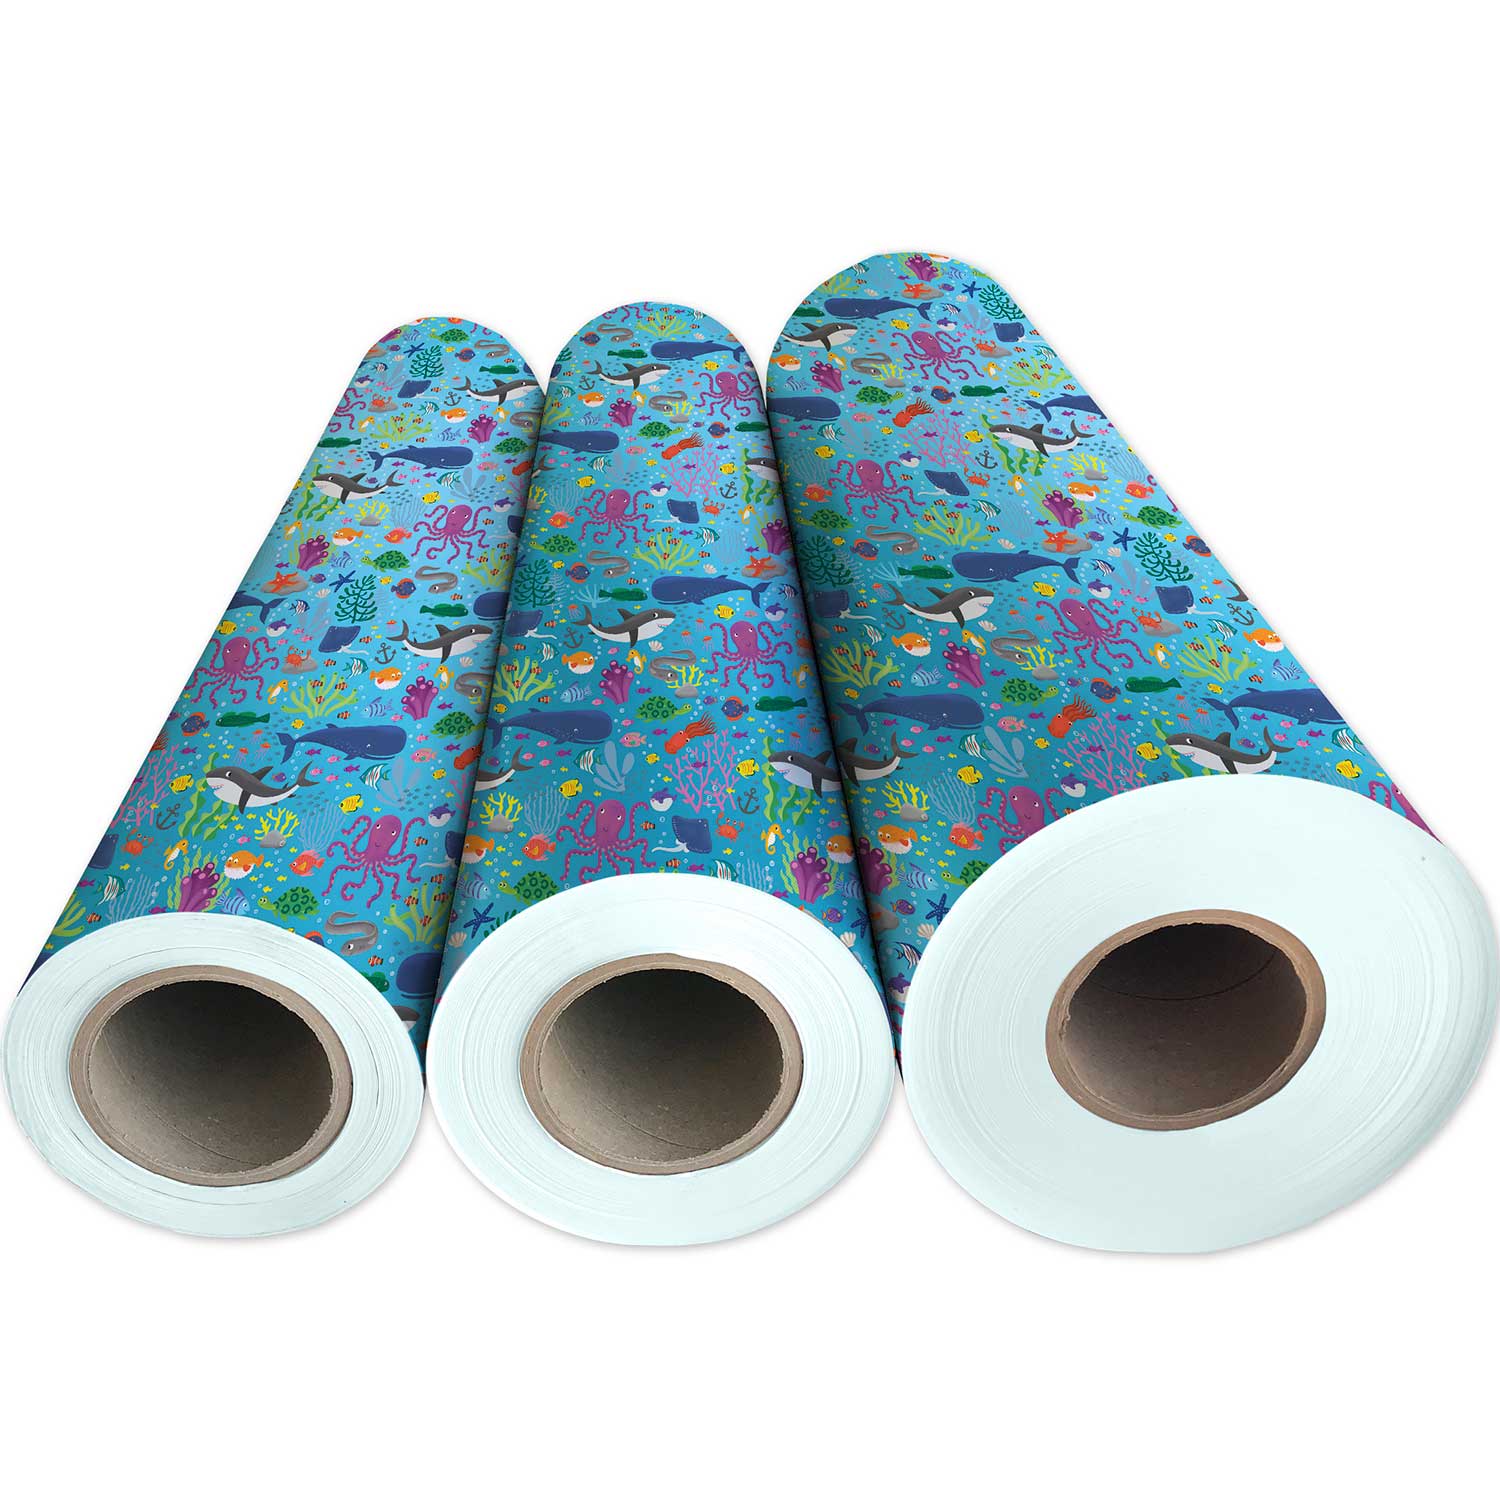 Whale Wrapping Paper Wrapping Paper for Boys Recyclable Wrapping Paper Blue  Wrapping Paper Birthday Wrapping Paper 